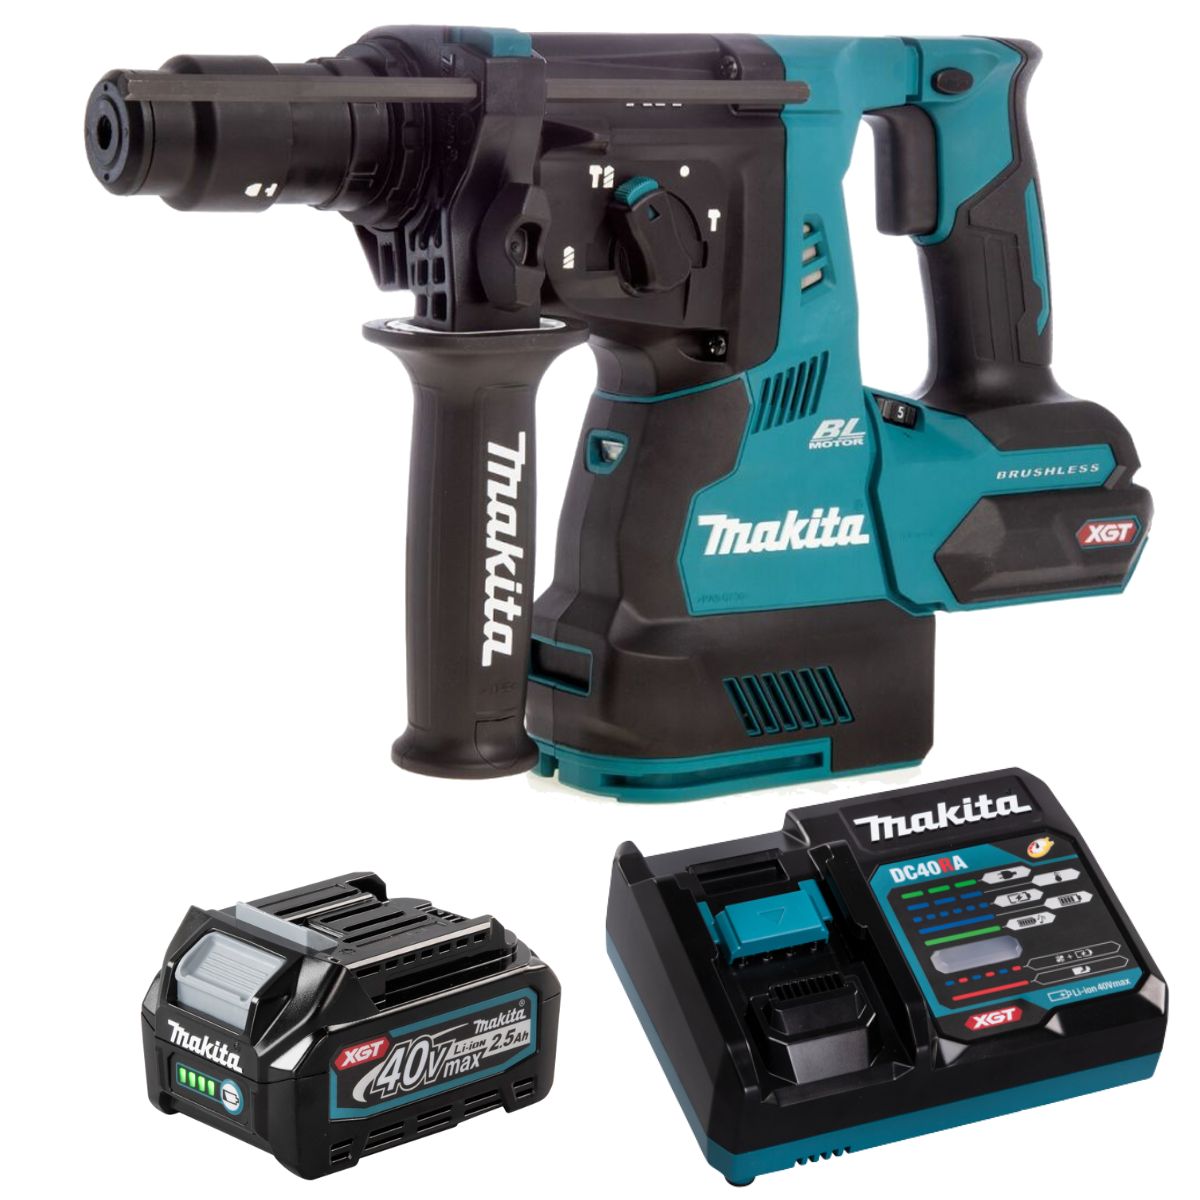 Makita HR003GZ 40V Brushless SDS+ Rotary Hammer Drill With 1 x 2.5Ah Battery & Charger